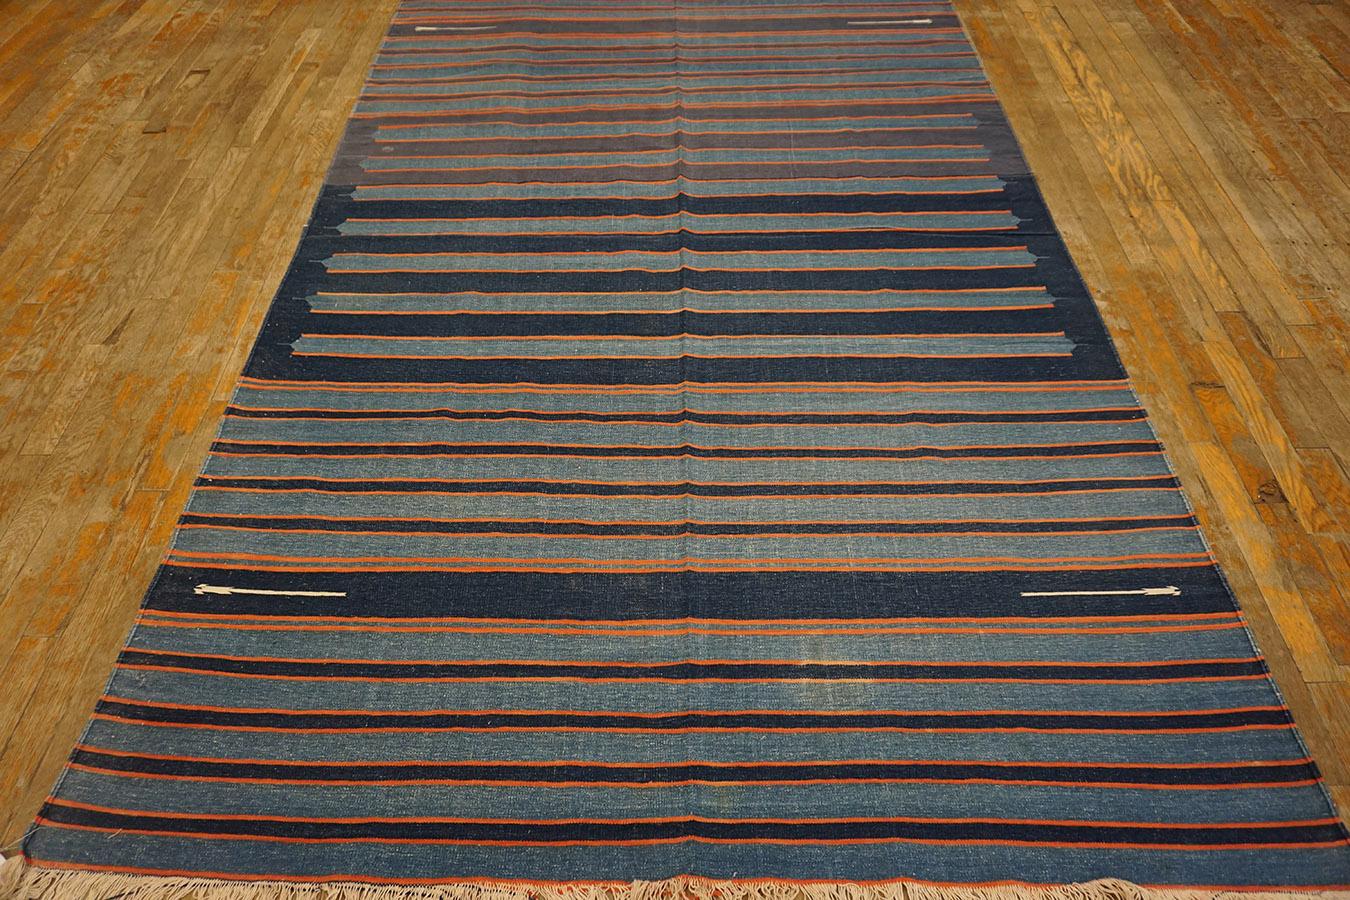 Hand-Woven 1930s Indian Cotton Dhurrie Carpet ( 5'3